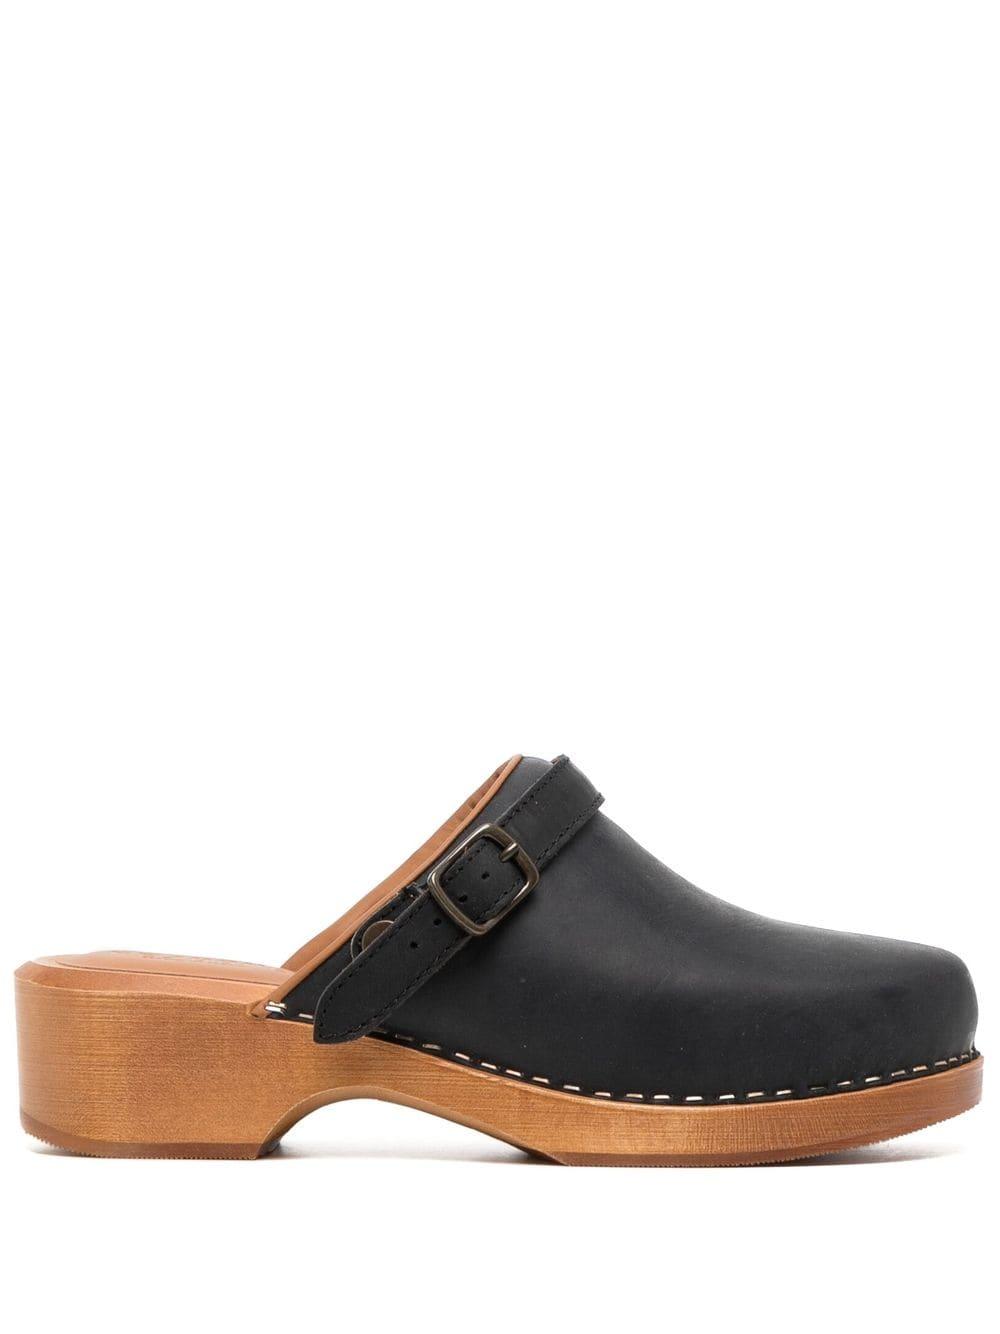 RE/DONE Wooden-platform Leather Clogs in Black | Lyst